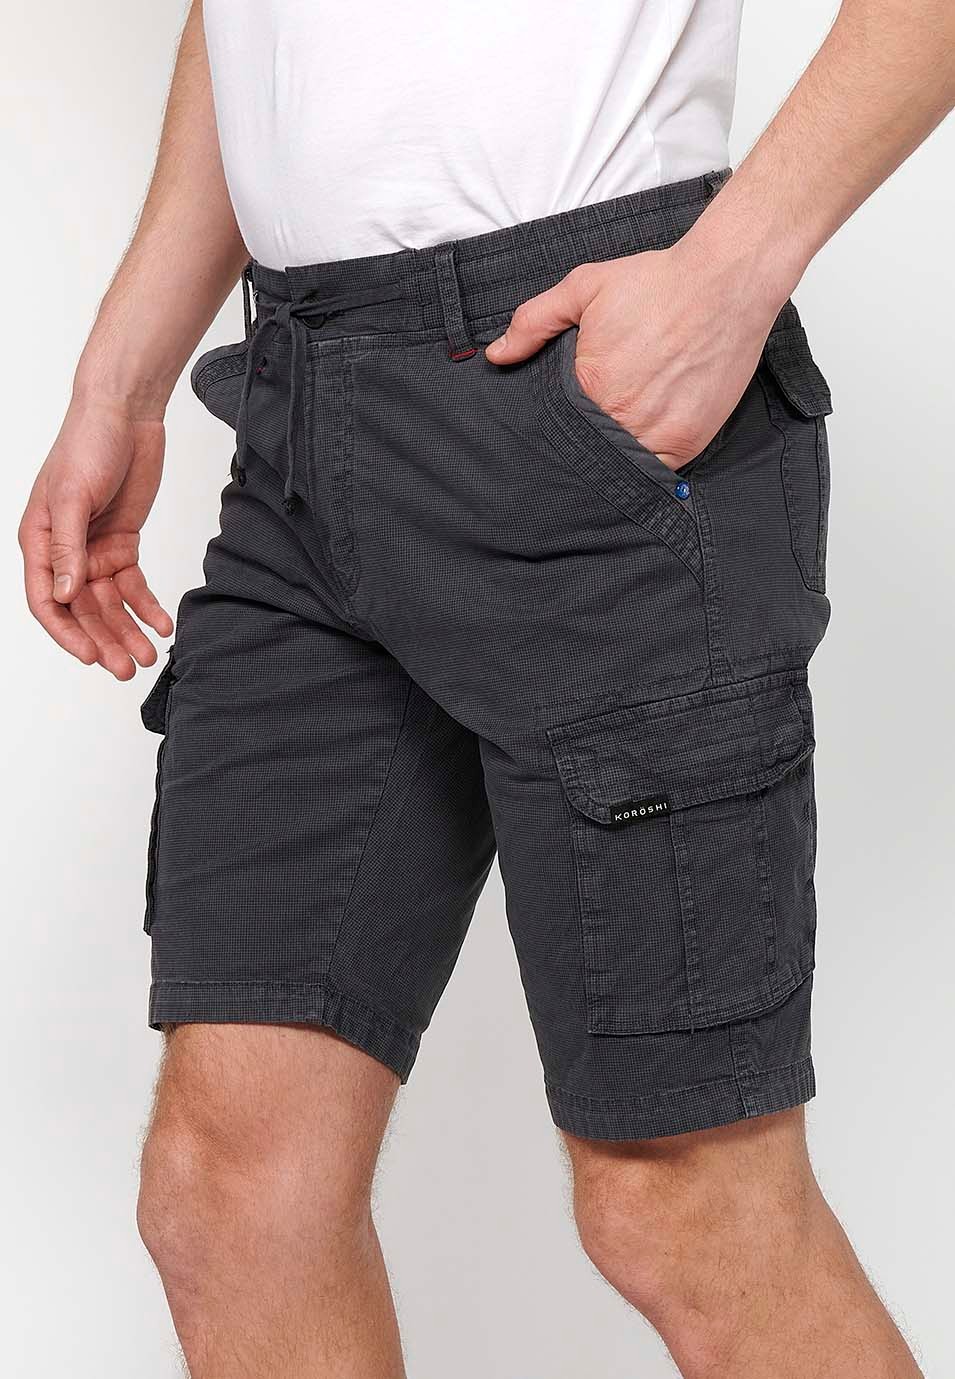 Cargo shorts with front closure with zipper and button and four pockets, two rear pockets with flap with two cargo pockets with flap and adjustable waist with drawstring in Gray for Men 5